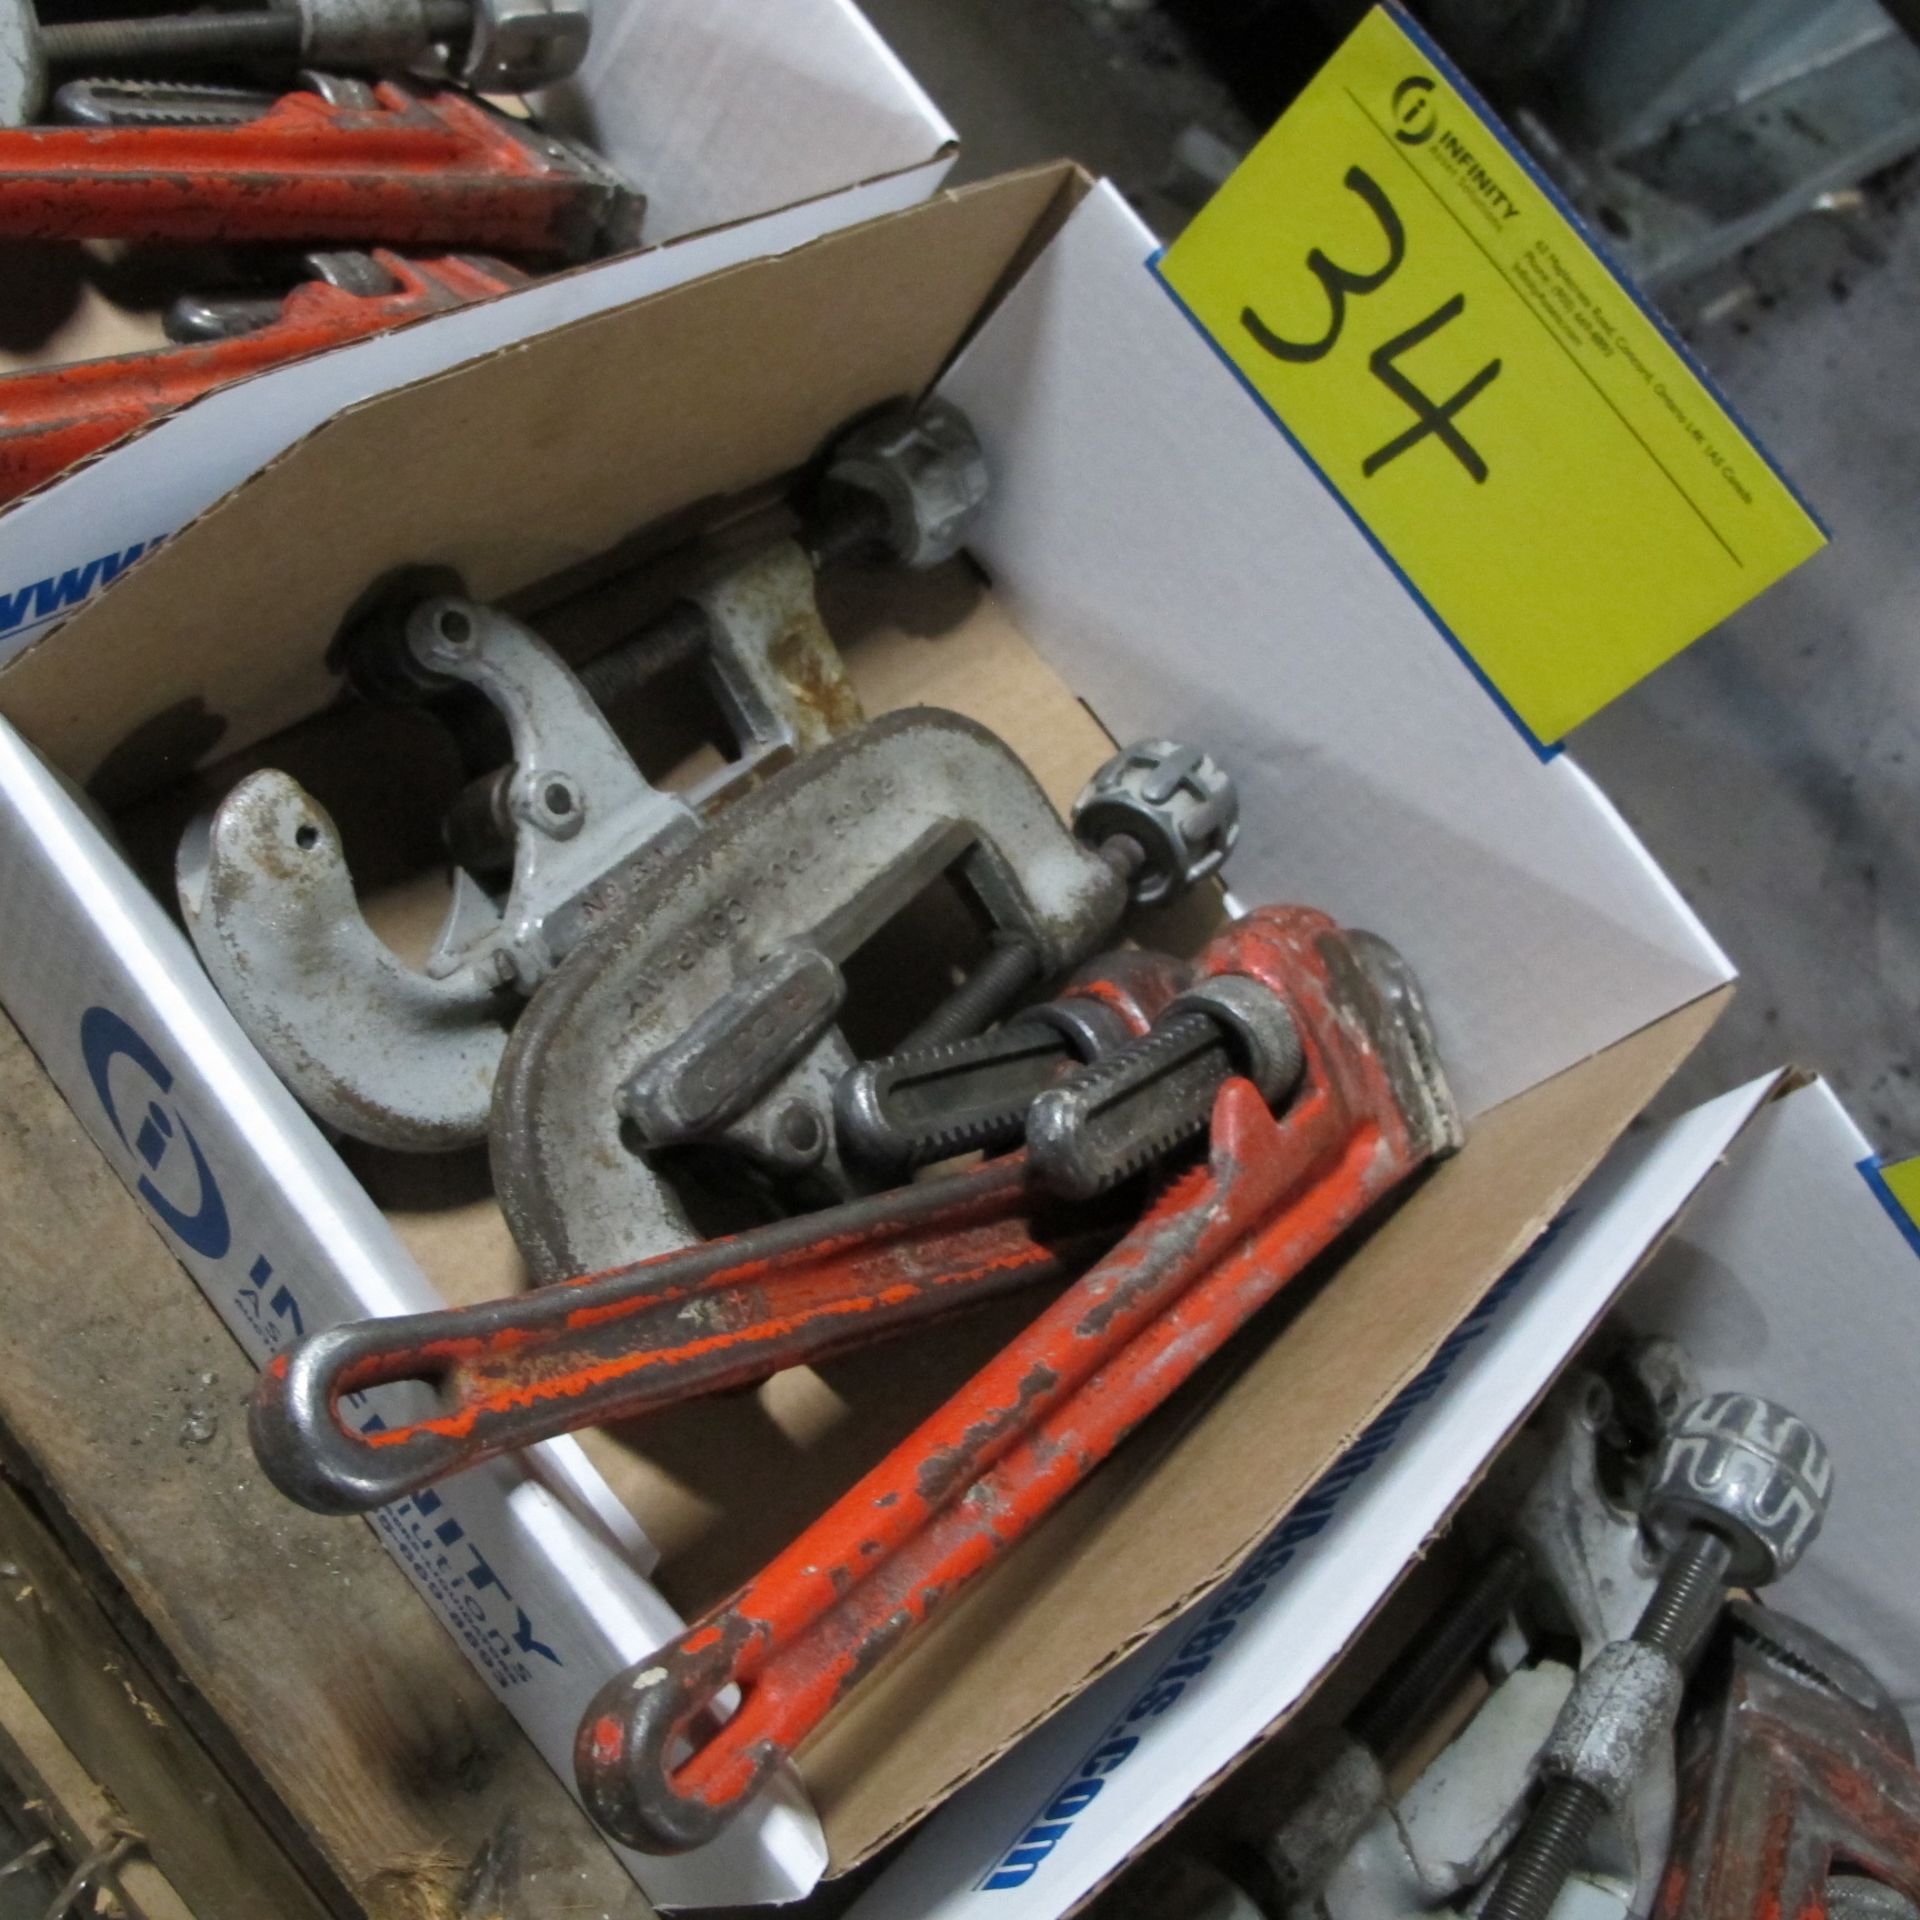 LOT OF (1) BOX W/ (2) RIDGID PIPE CUTTERS 1-3", (2) RIDGID PIPE WRENCHES 14"